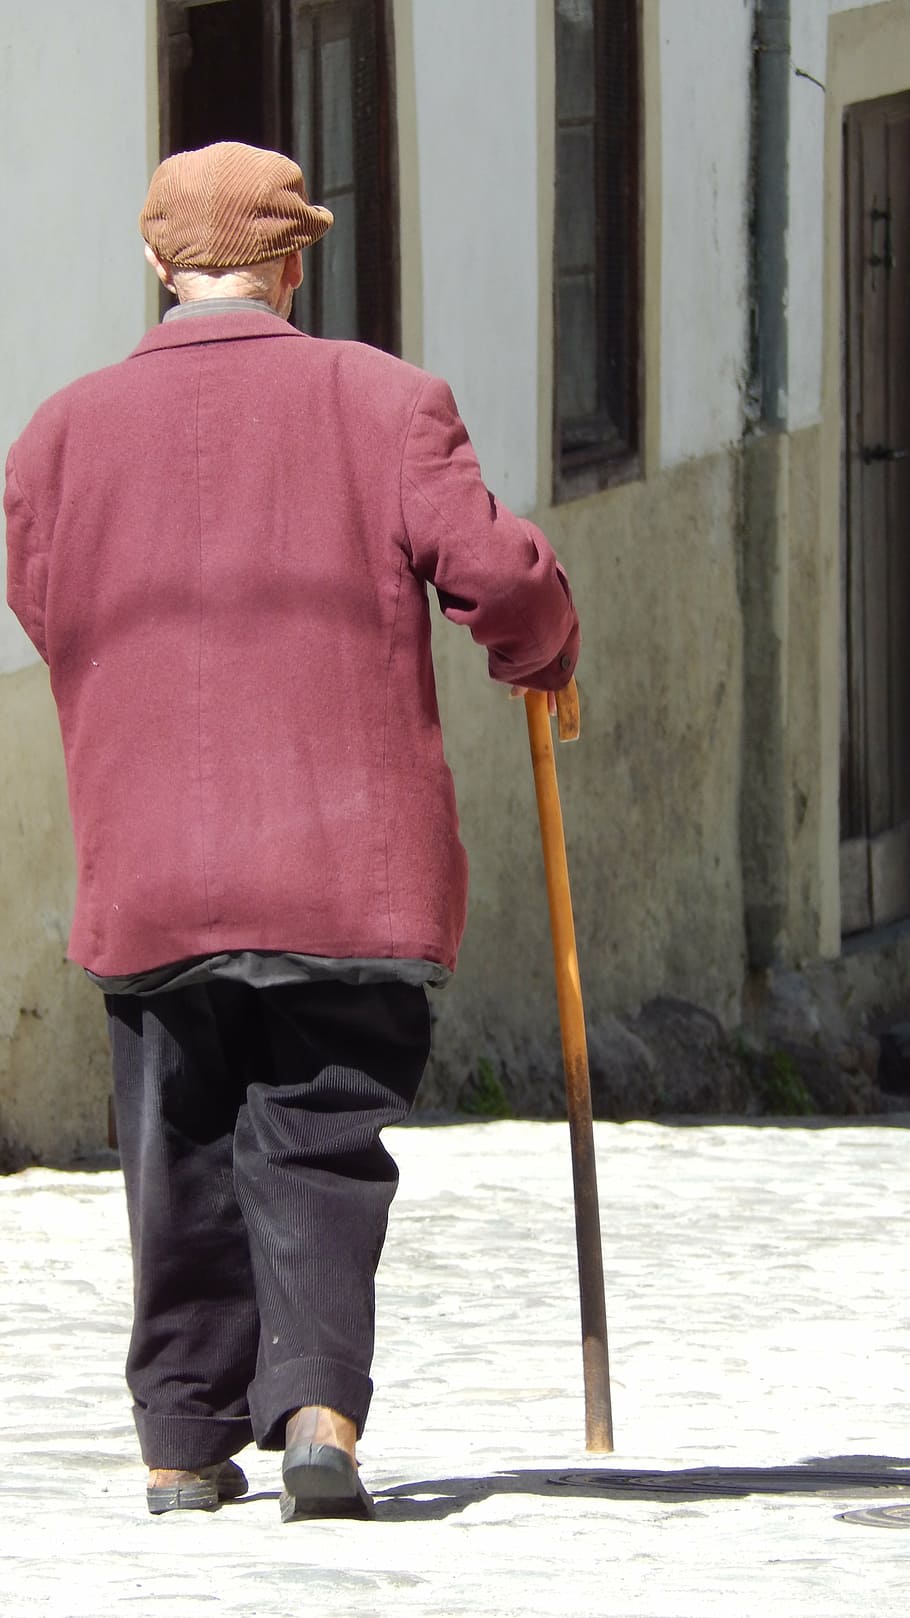 elder, calendar, salamanca, rear view, real people, one person, architecture, walking cane, day, full length